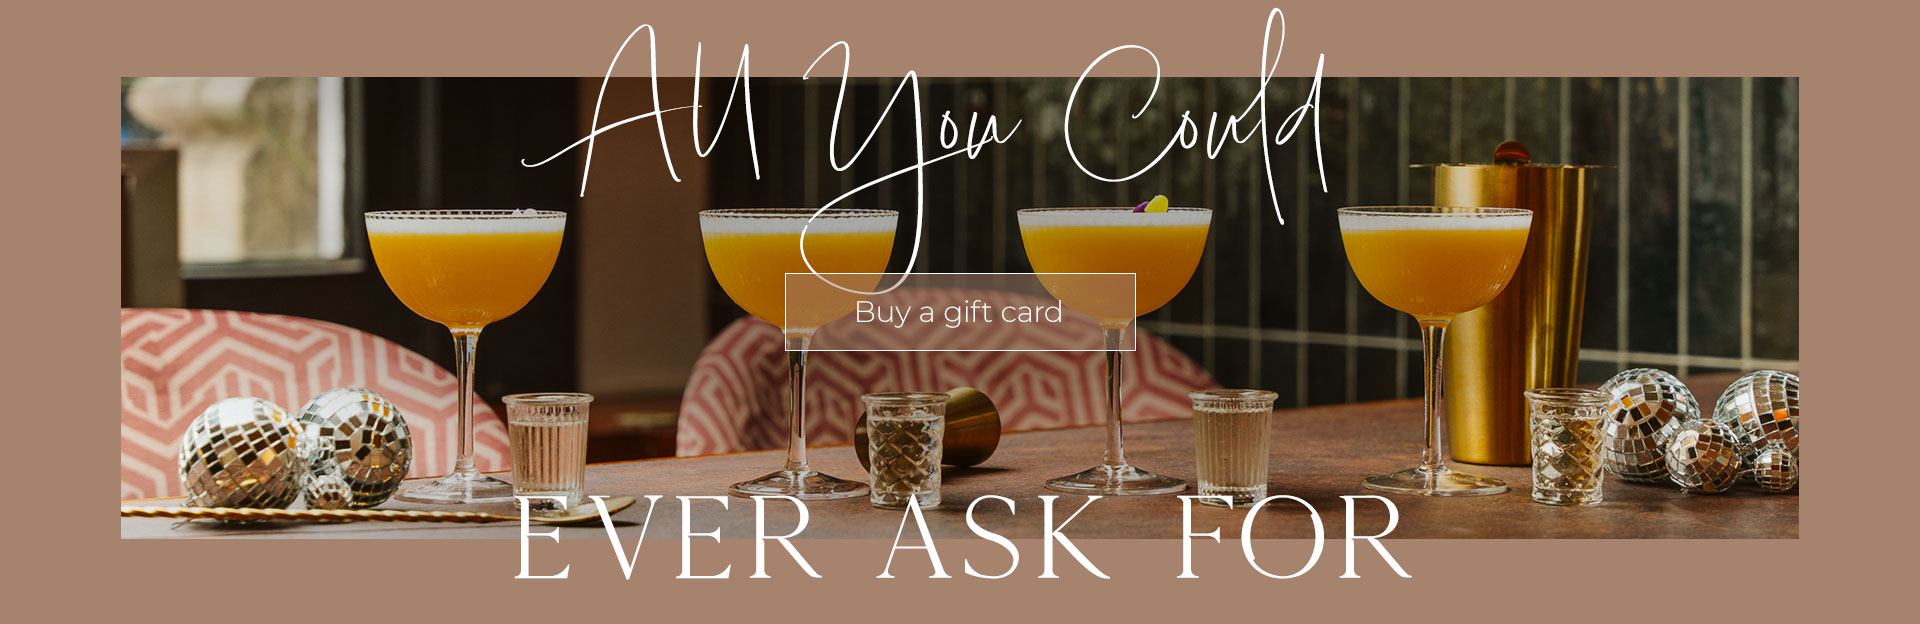 All Bar One Gift Cards at All Bar One Harrogate